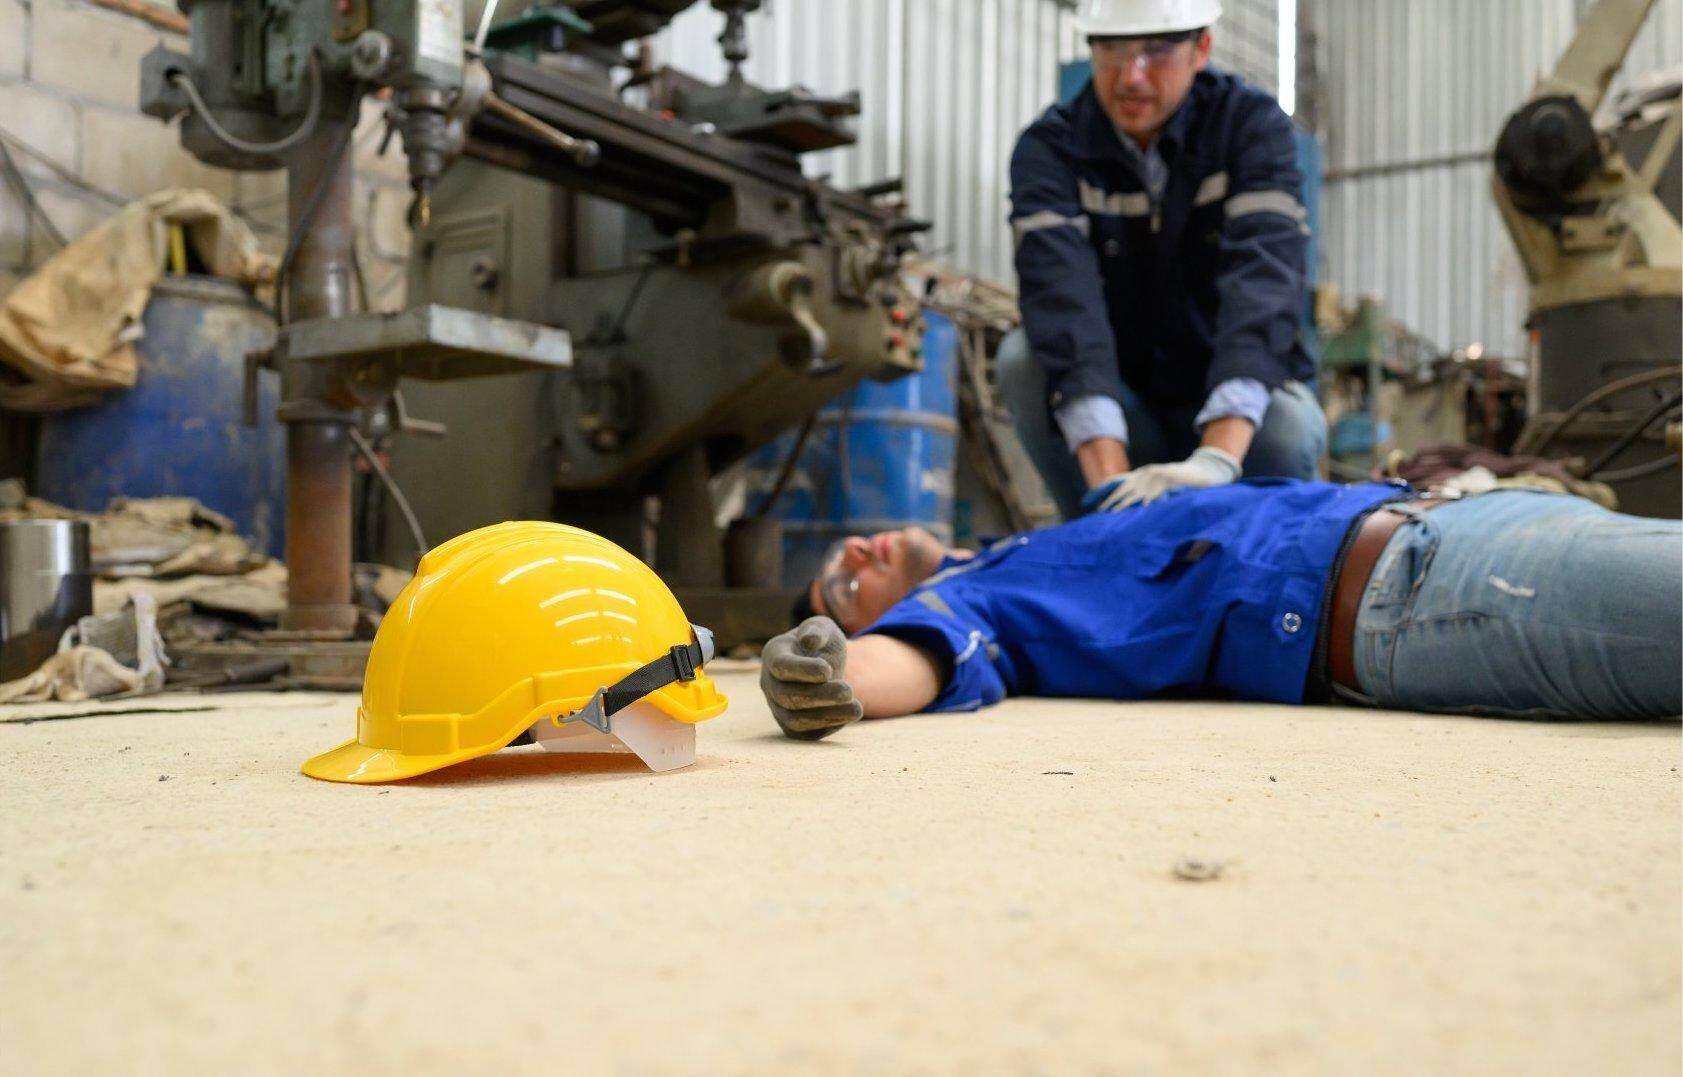 An unconscious man who has been injured on the job who will file for workers compensation in Smyrna, Georgia